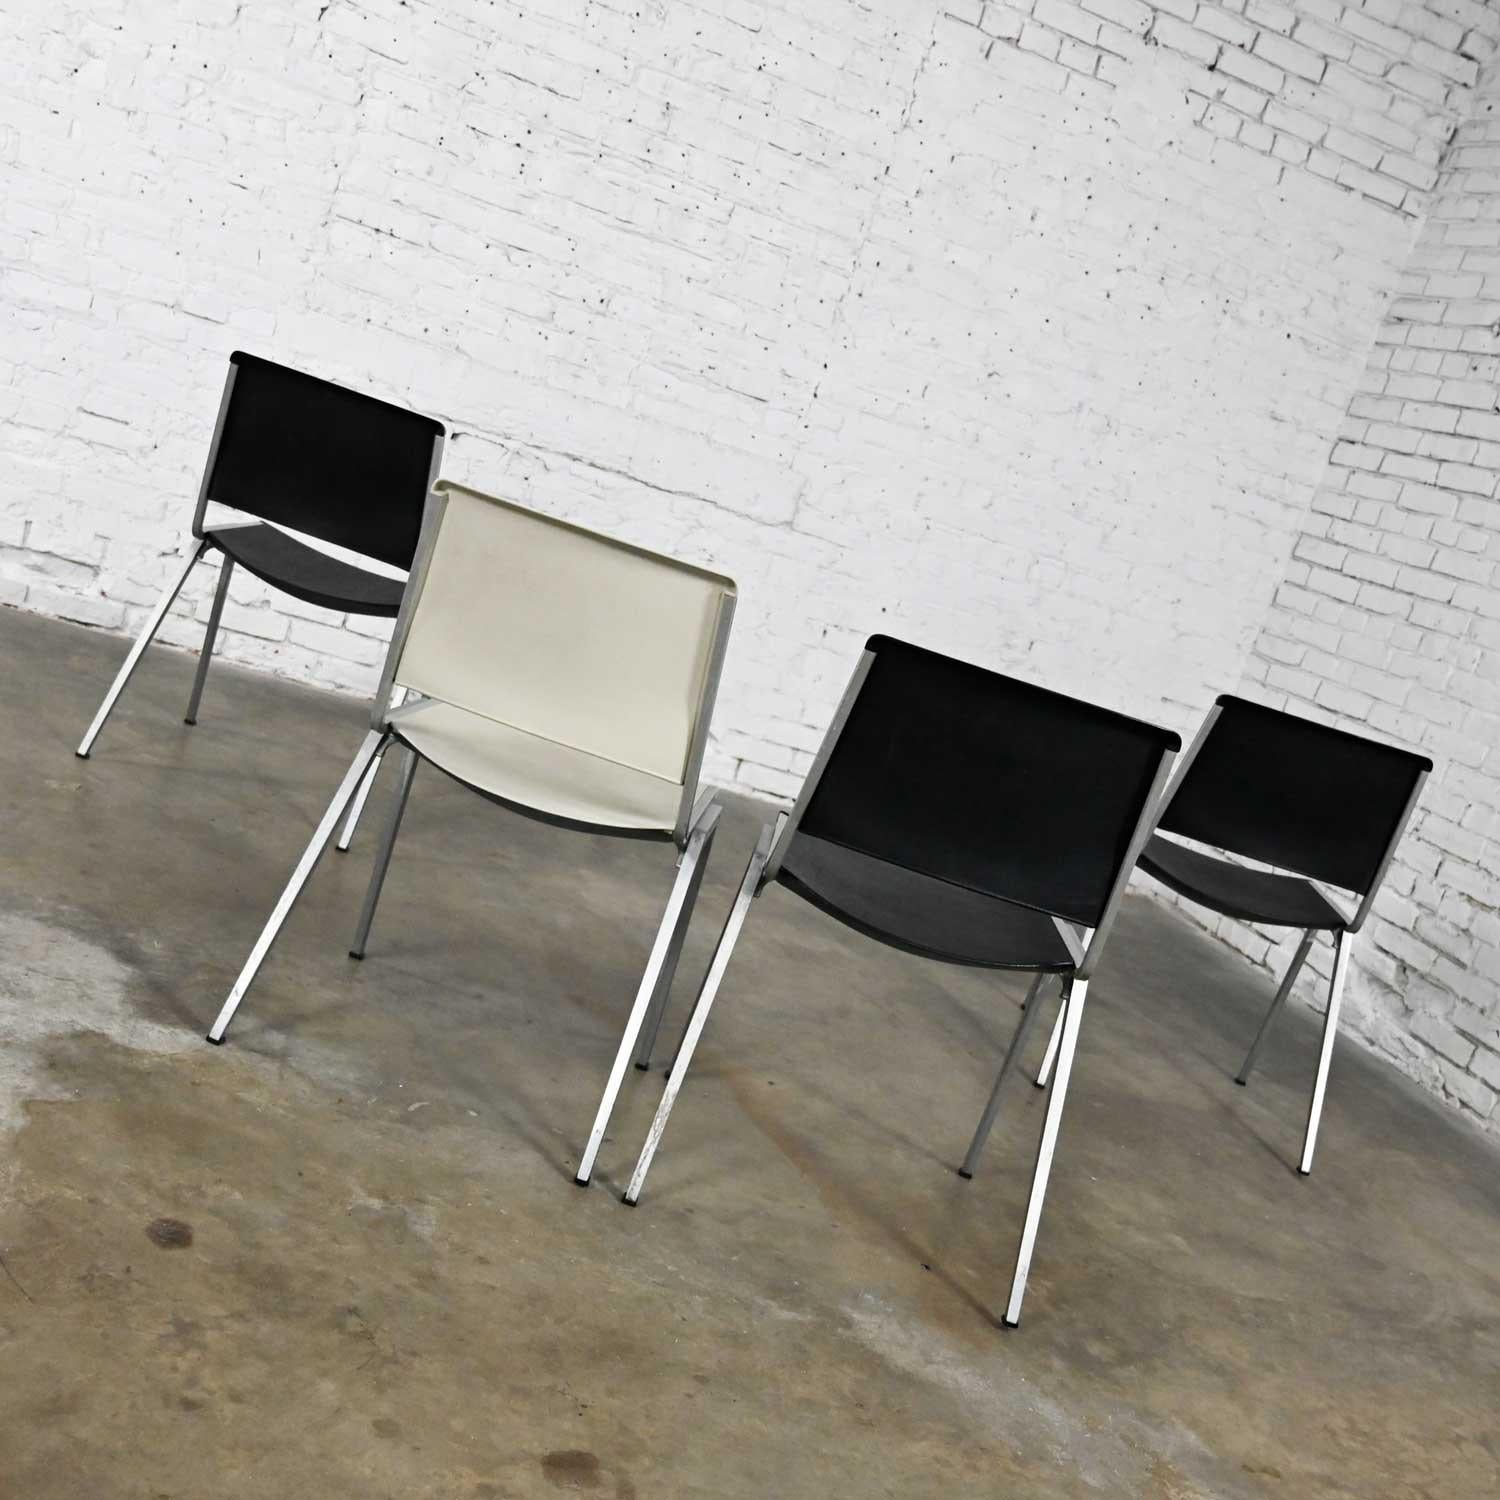 Mid-Century Modern Vintage Aluminum Steelcase Stacking Chairs Model #1278 1 White 3 Black Set of 4 For Sale